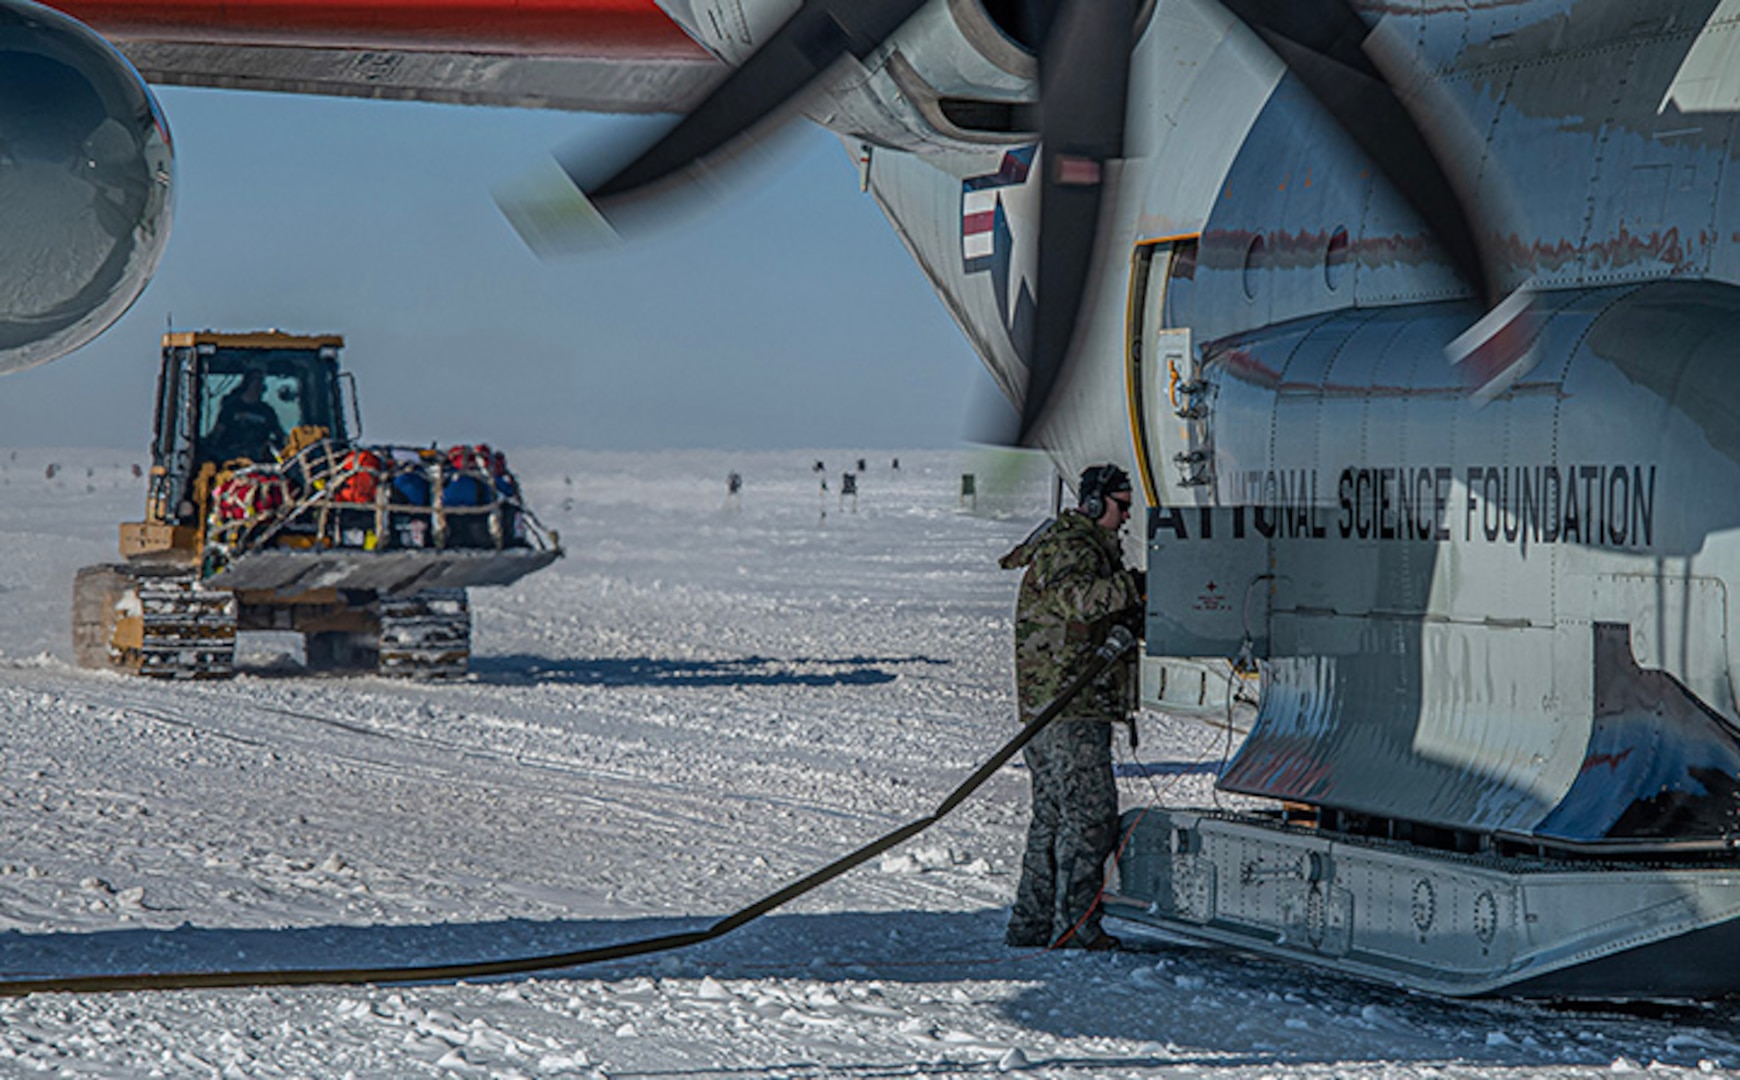 The 109th Airlift Wing supported the 34th season of Operation Deep Freeze at McMurdo Station, Antarctica, from October 2021 through February 2022.